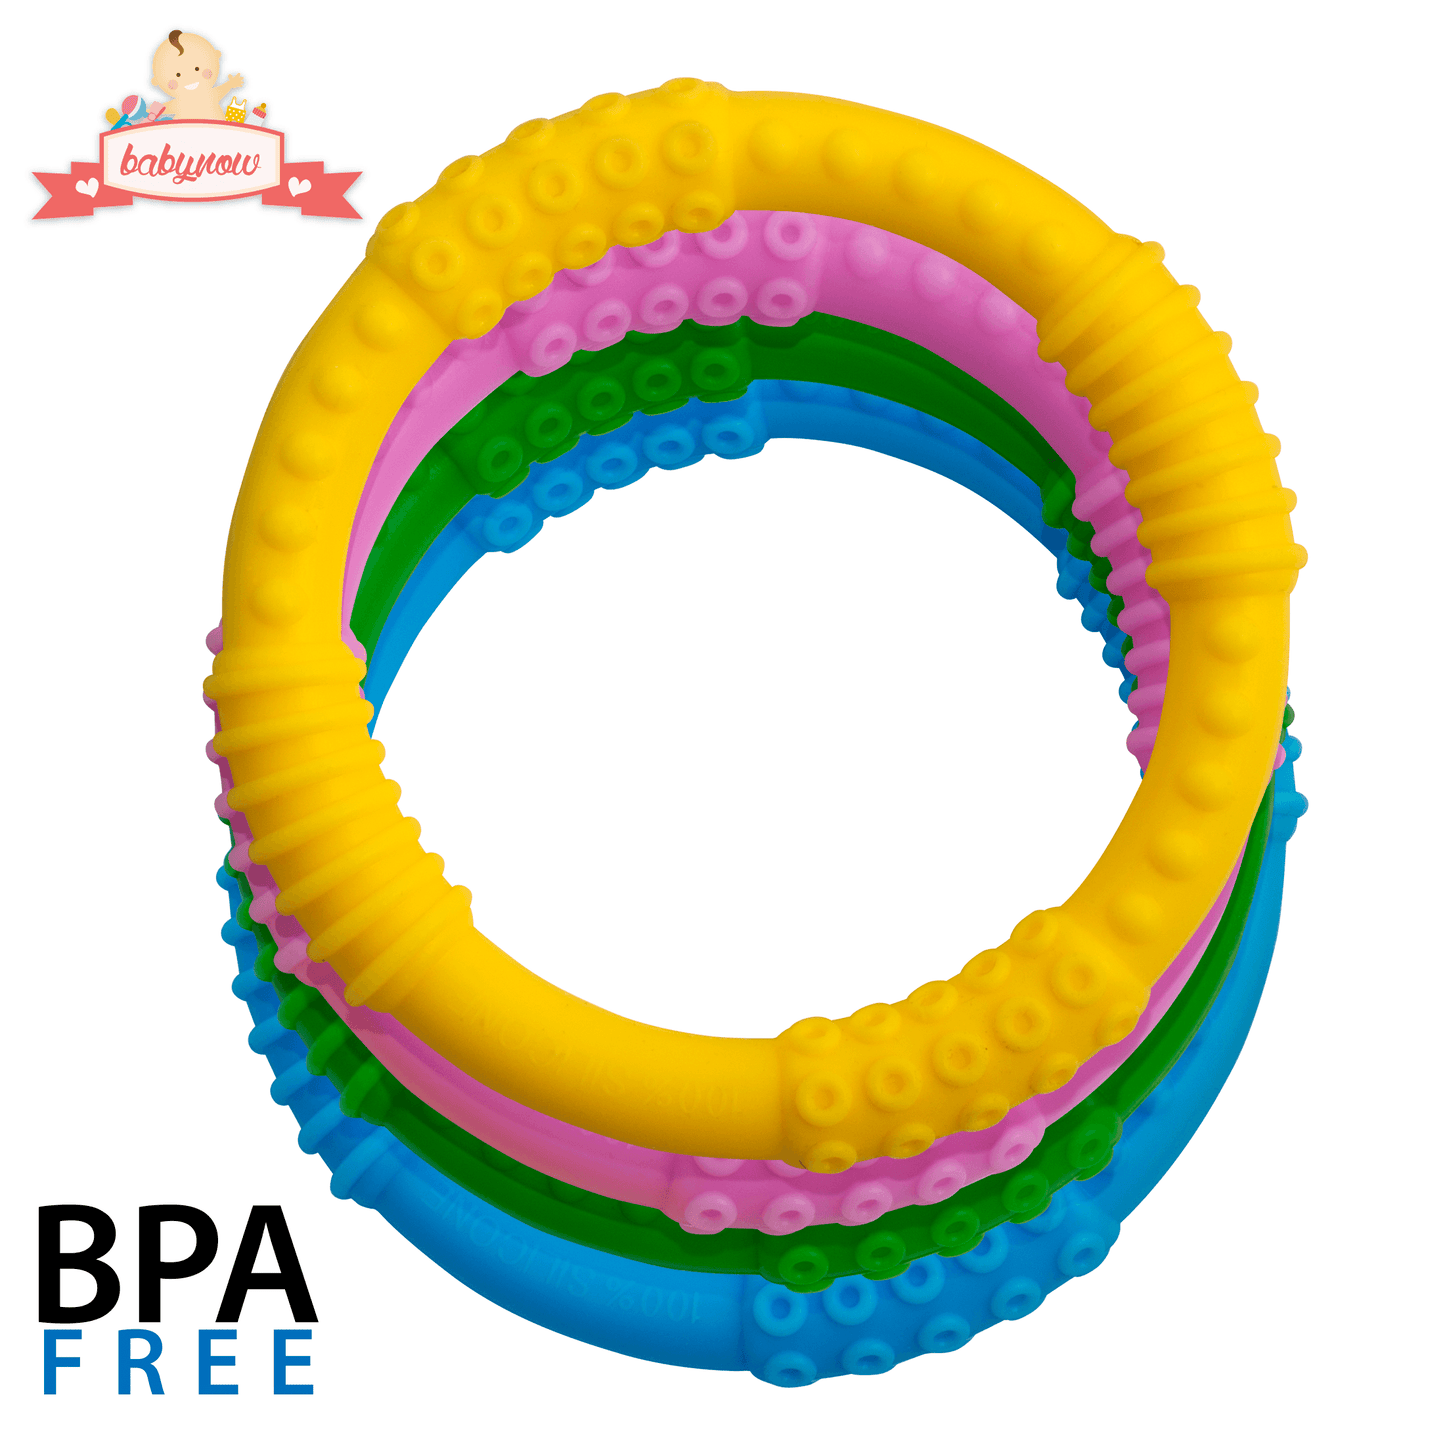 BABY Teething Rings Silicone Teether Pacifier Chew Toy Rings (4 PACK)